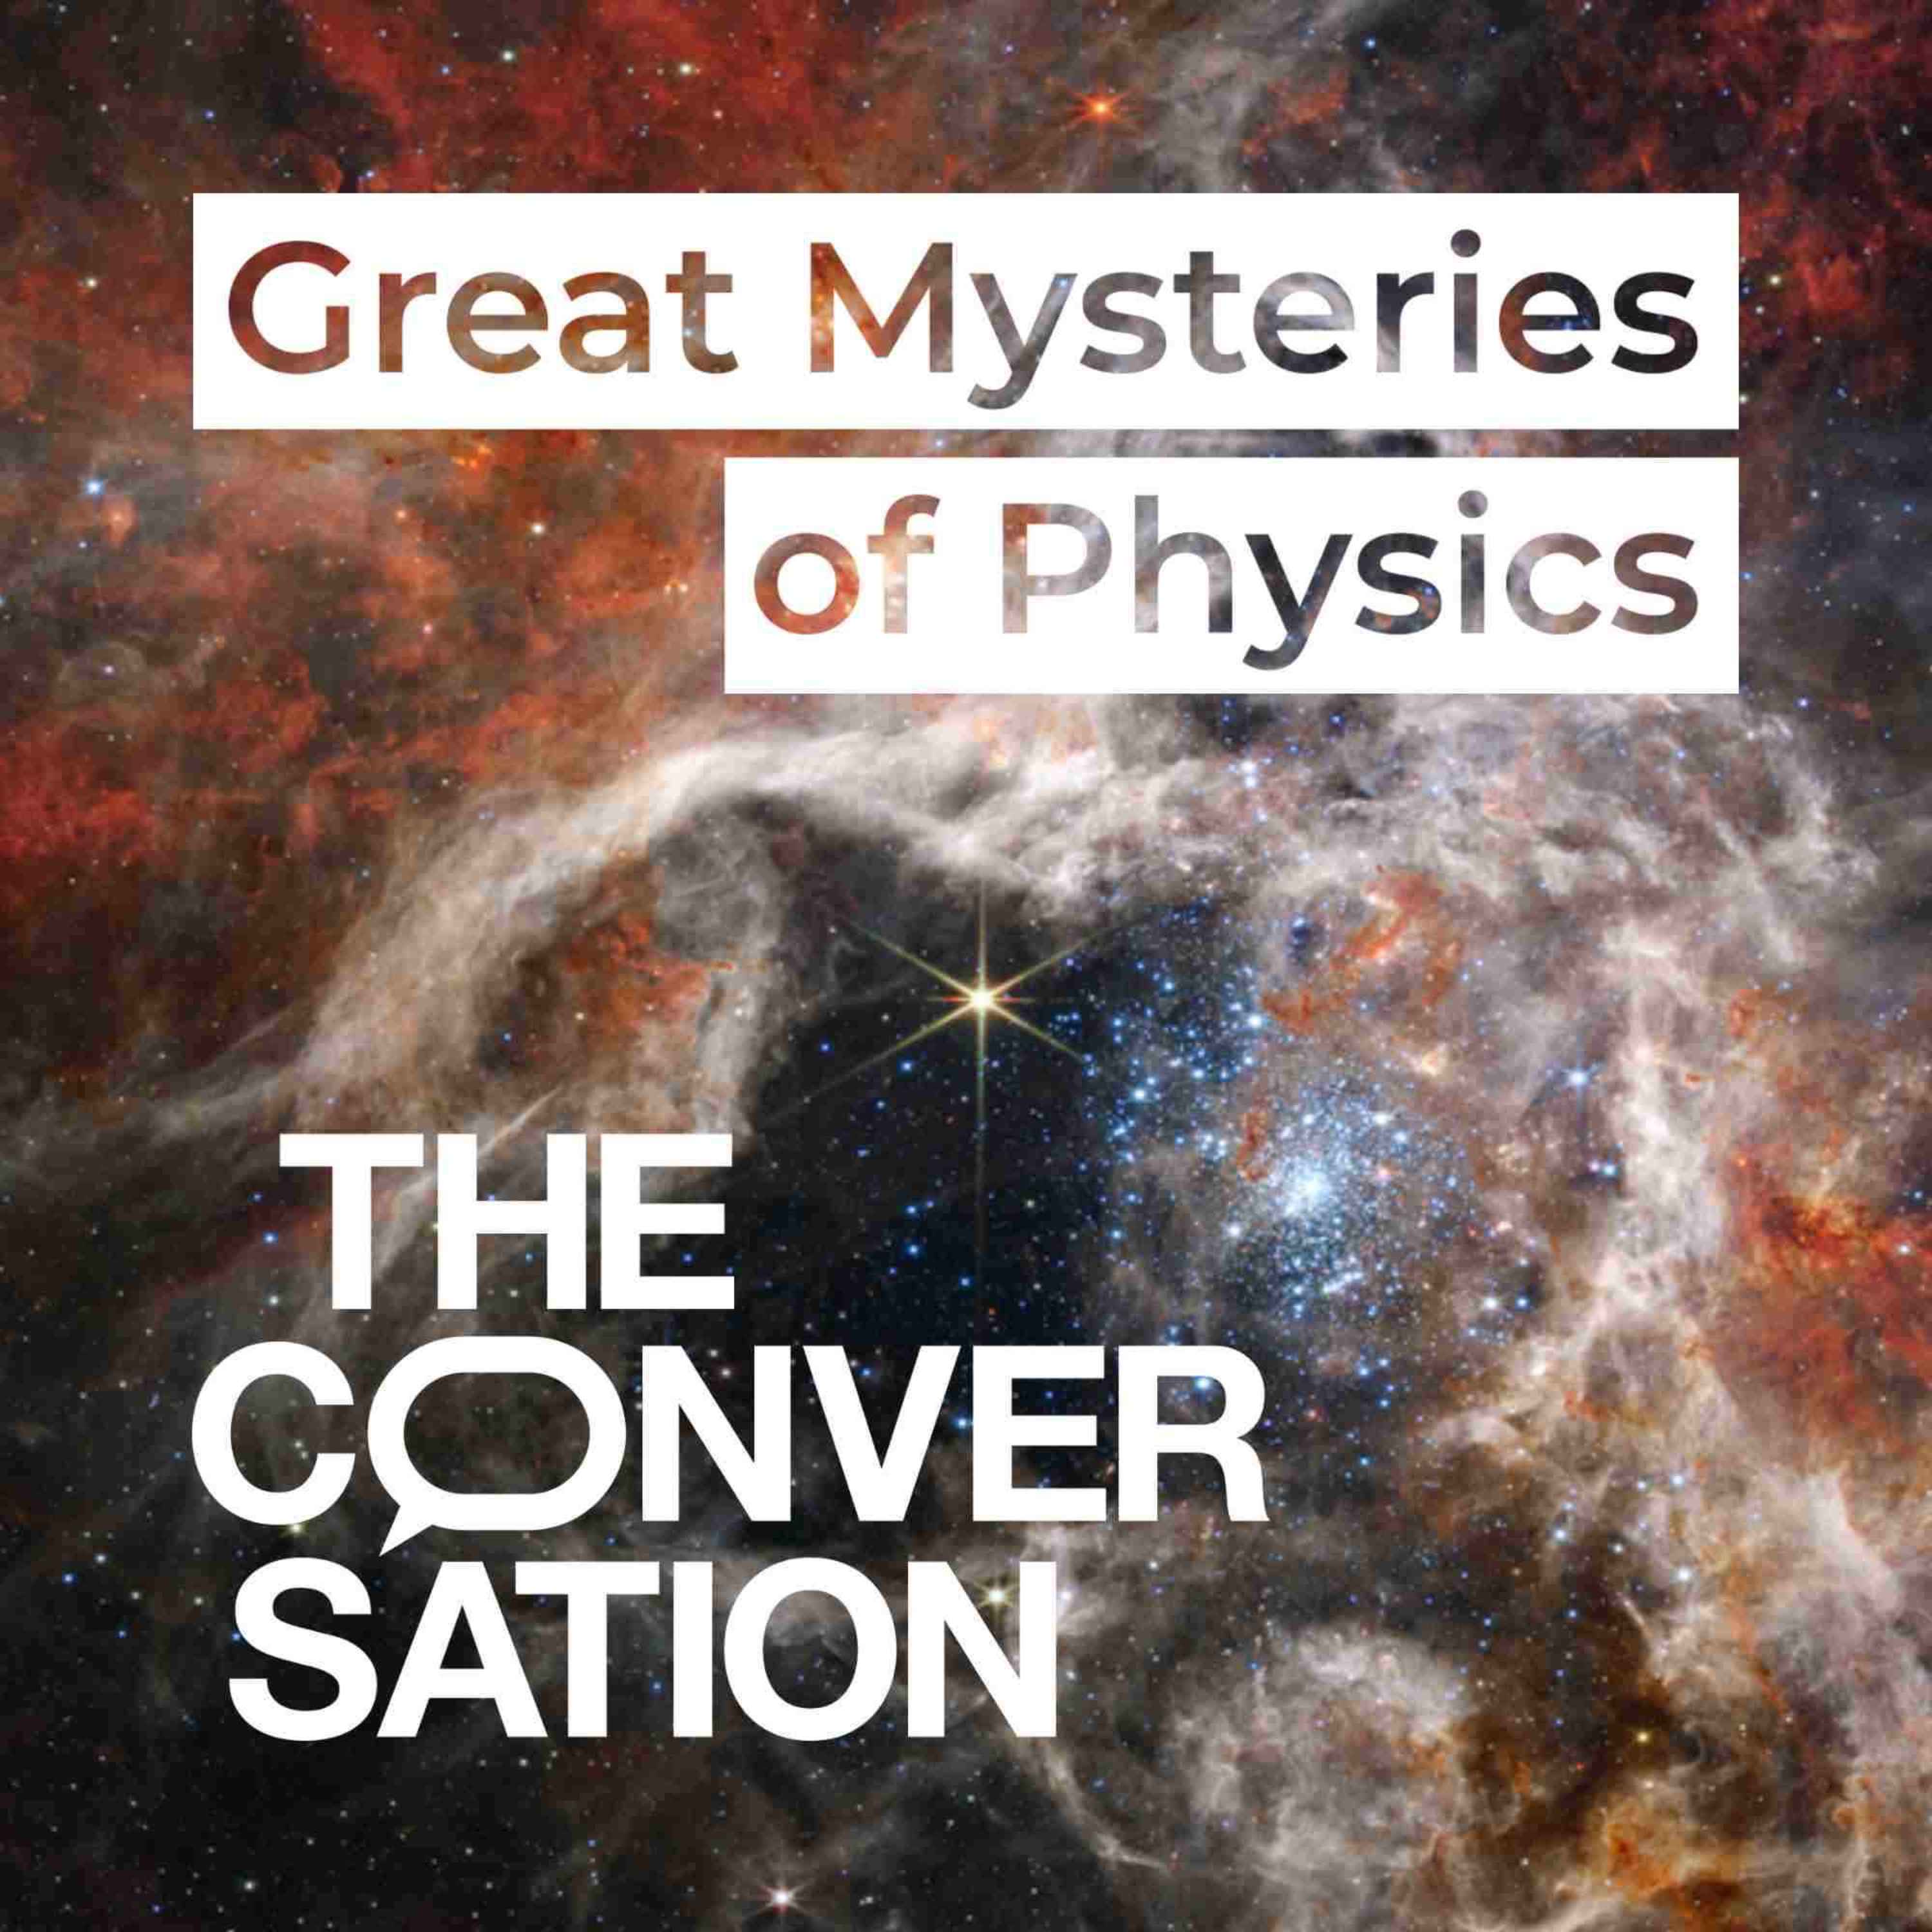 Great Mysteries of Physics